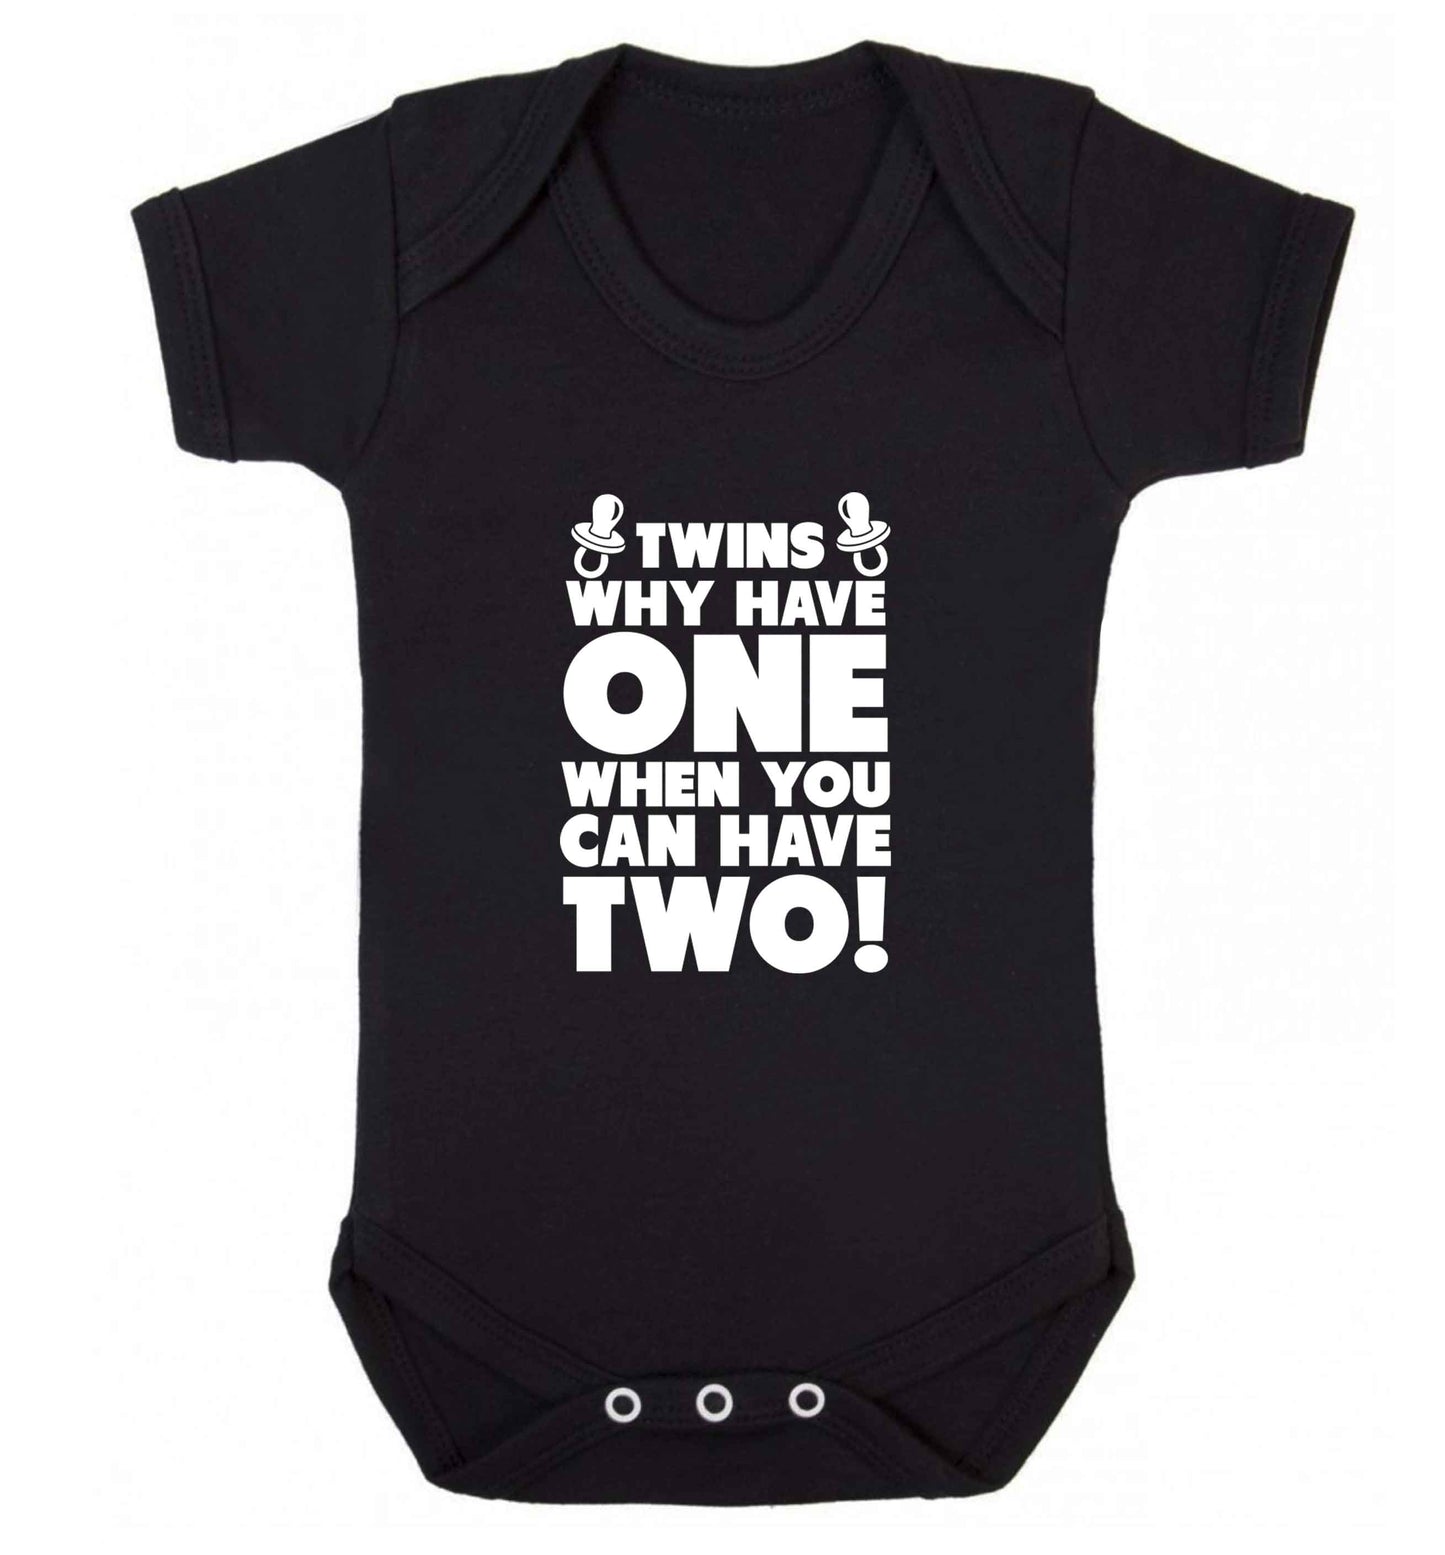 Twins why have one when you can have two baby vest black 18-24 months